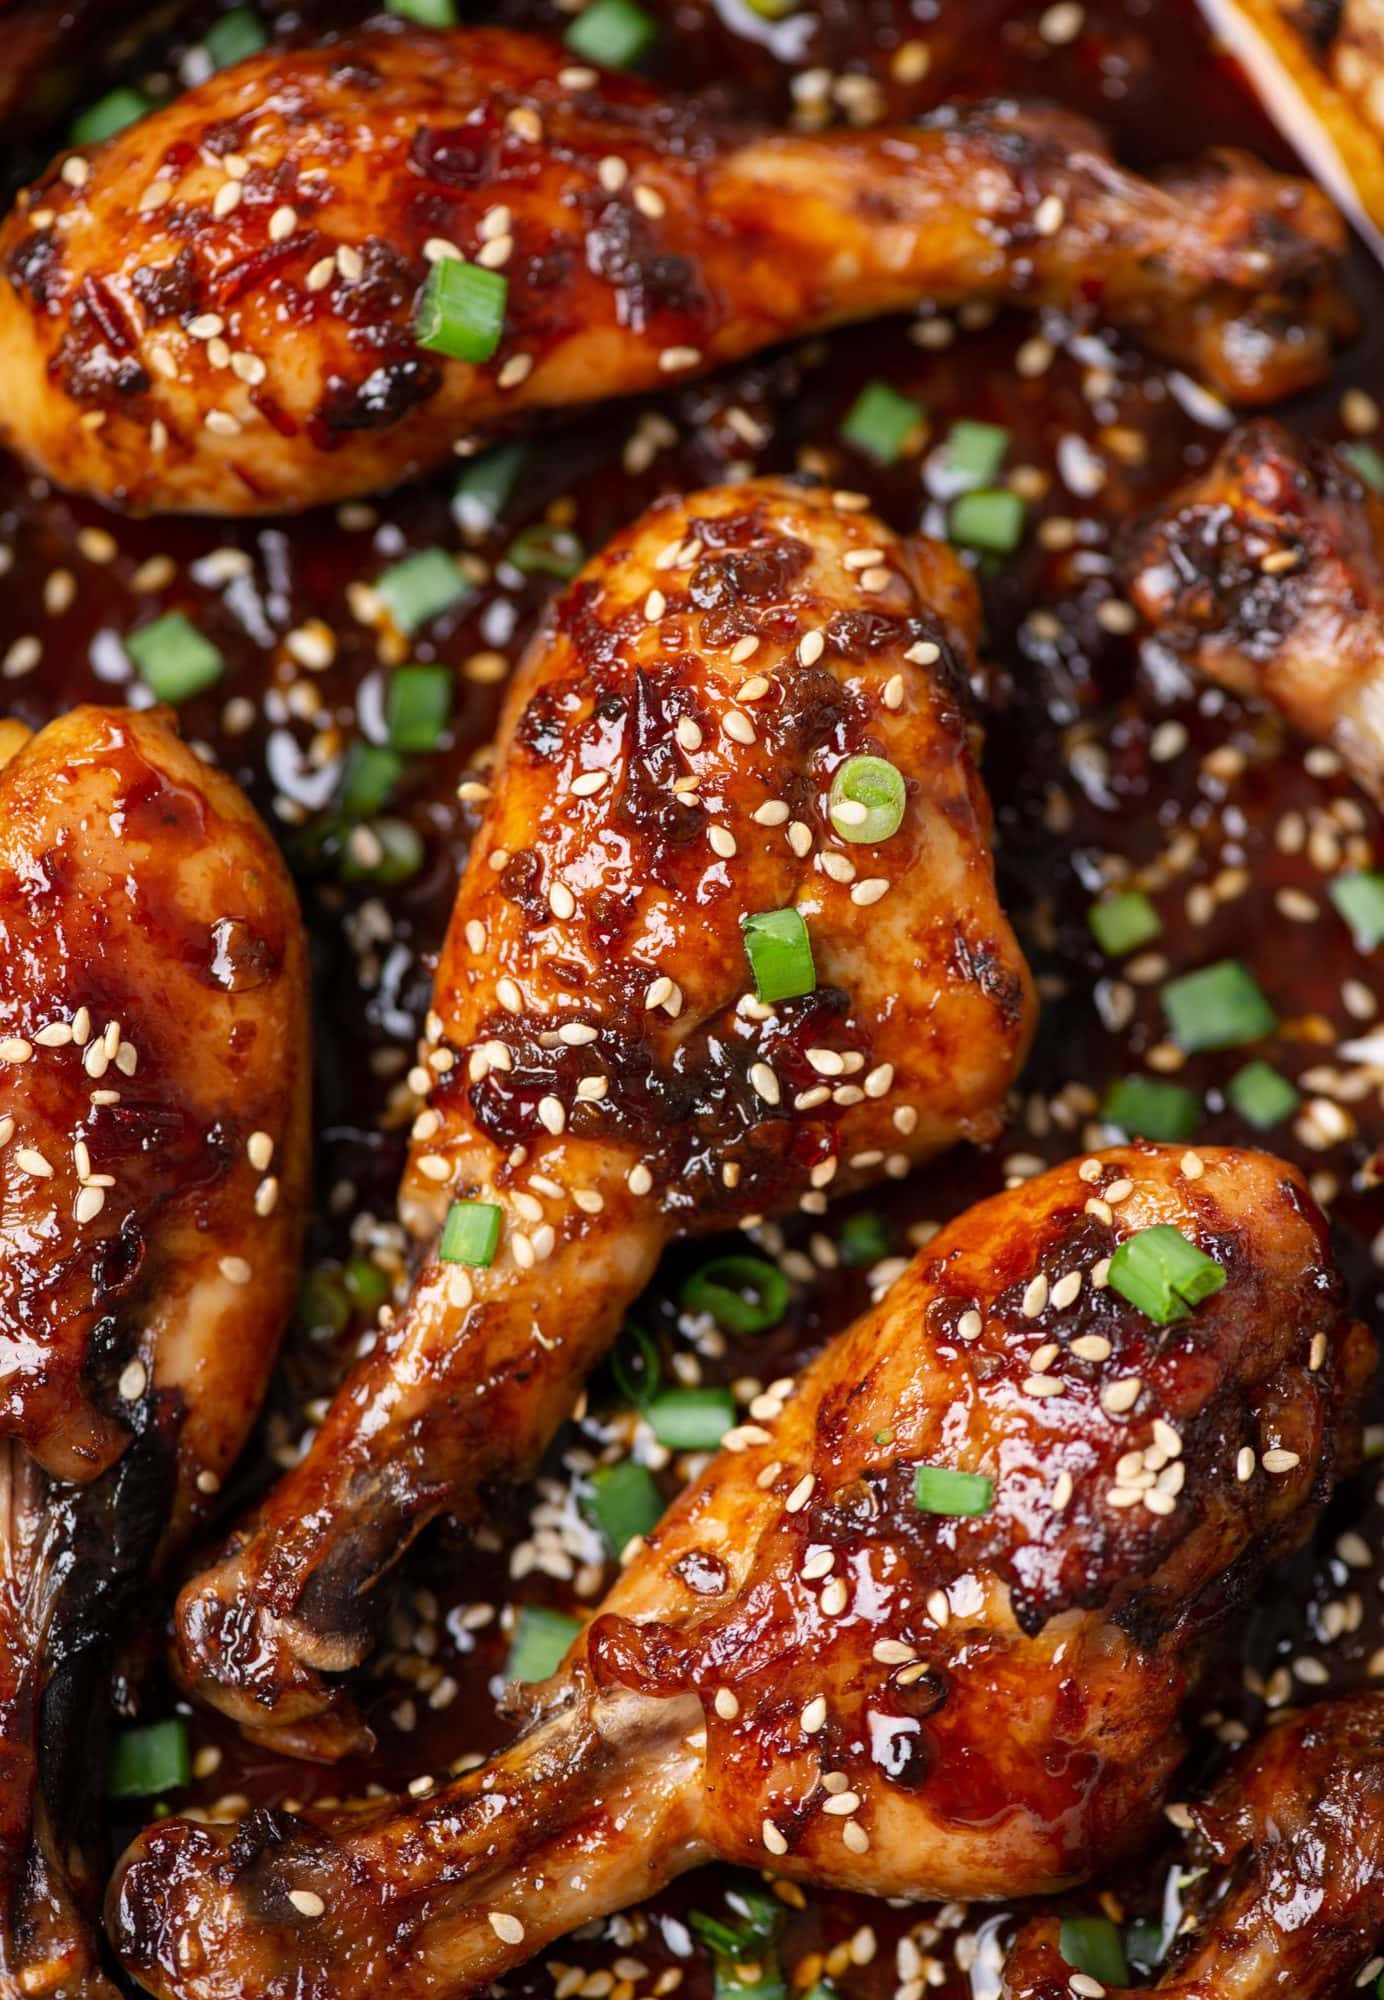 Honey Soy Baked Chicken Drumsticks - The flavours of kitchen